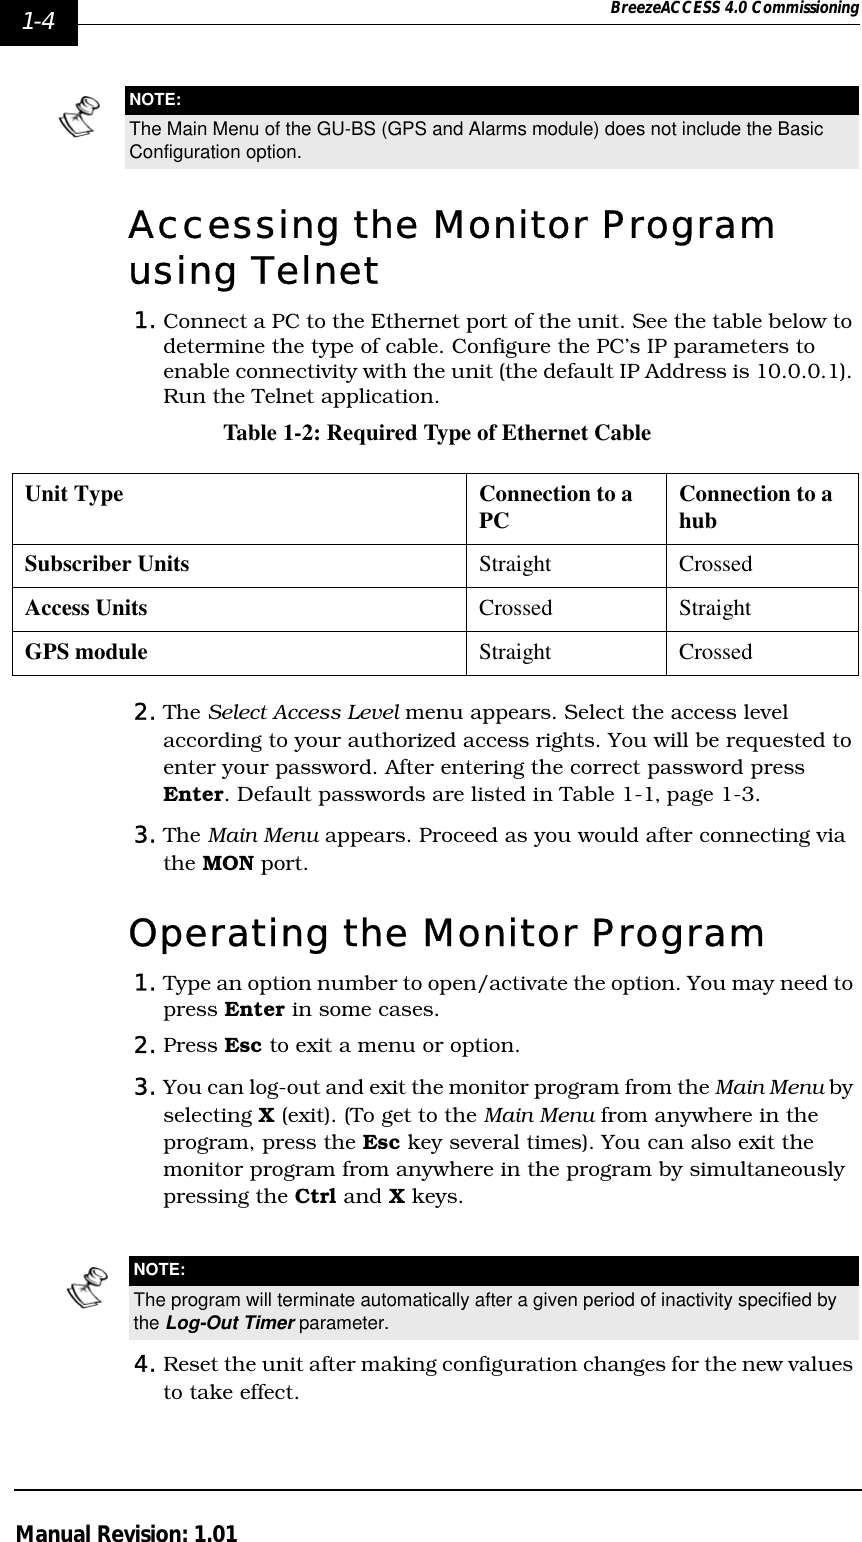 1-4 BreezeACCESS 4.0 CommissioningManual Revision: 1.01Accessing the Monitor Program using Telnet1. Connect a PC to the Ethernet port of the unit. See the table below to determine the type of cable. Configure the PC’s IP parameters to enable connectivity with the unit (the default IP Address is 10.0.0.1). Run the Telnet application.Table 1-2: Required Type of Ethernet Cable2. The Select Access Level menu appears. Select the access level according to your authorized access rights. You will be requested to enter your password. After entering the correct password press Enter. Default passwords are listed in Table 1-1‚ page 1-3.3. The Main Menu appears. Proceed as you would after connecting via the MON port.Operating the Monitor Program1. Type an option number to open/activate the option. You may need to press Enter in some cases.2. Press Esc to exit a menu or option.3. You can log-out and exit the monitor program from the Main Menu by selecting X (exit). (To get to the Main Menu from anywhere in the program, press the Esc key several times). You can also exit the monitor program from anywhere in the program by simultaneously pressing the Ctrl and X keys. 4. Reset the unit after making configuration changes for the new values to take effect.NOTE:The Main Menu of the GU-BS (GPS and Alarms module) does not include the Basic Configuration option.Unit Type Connection to a PC Connection to a hubSubscriber Units   Straight CrossedAccess Units Crossed StraightGPS module Straight CrossedNOTE:The program will terminate automatically after a given period of inactivity specified by the Log-Out Timer parameter.